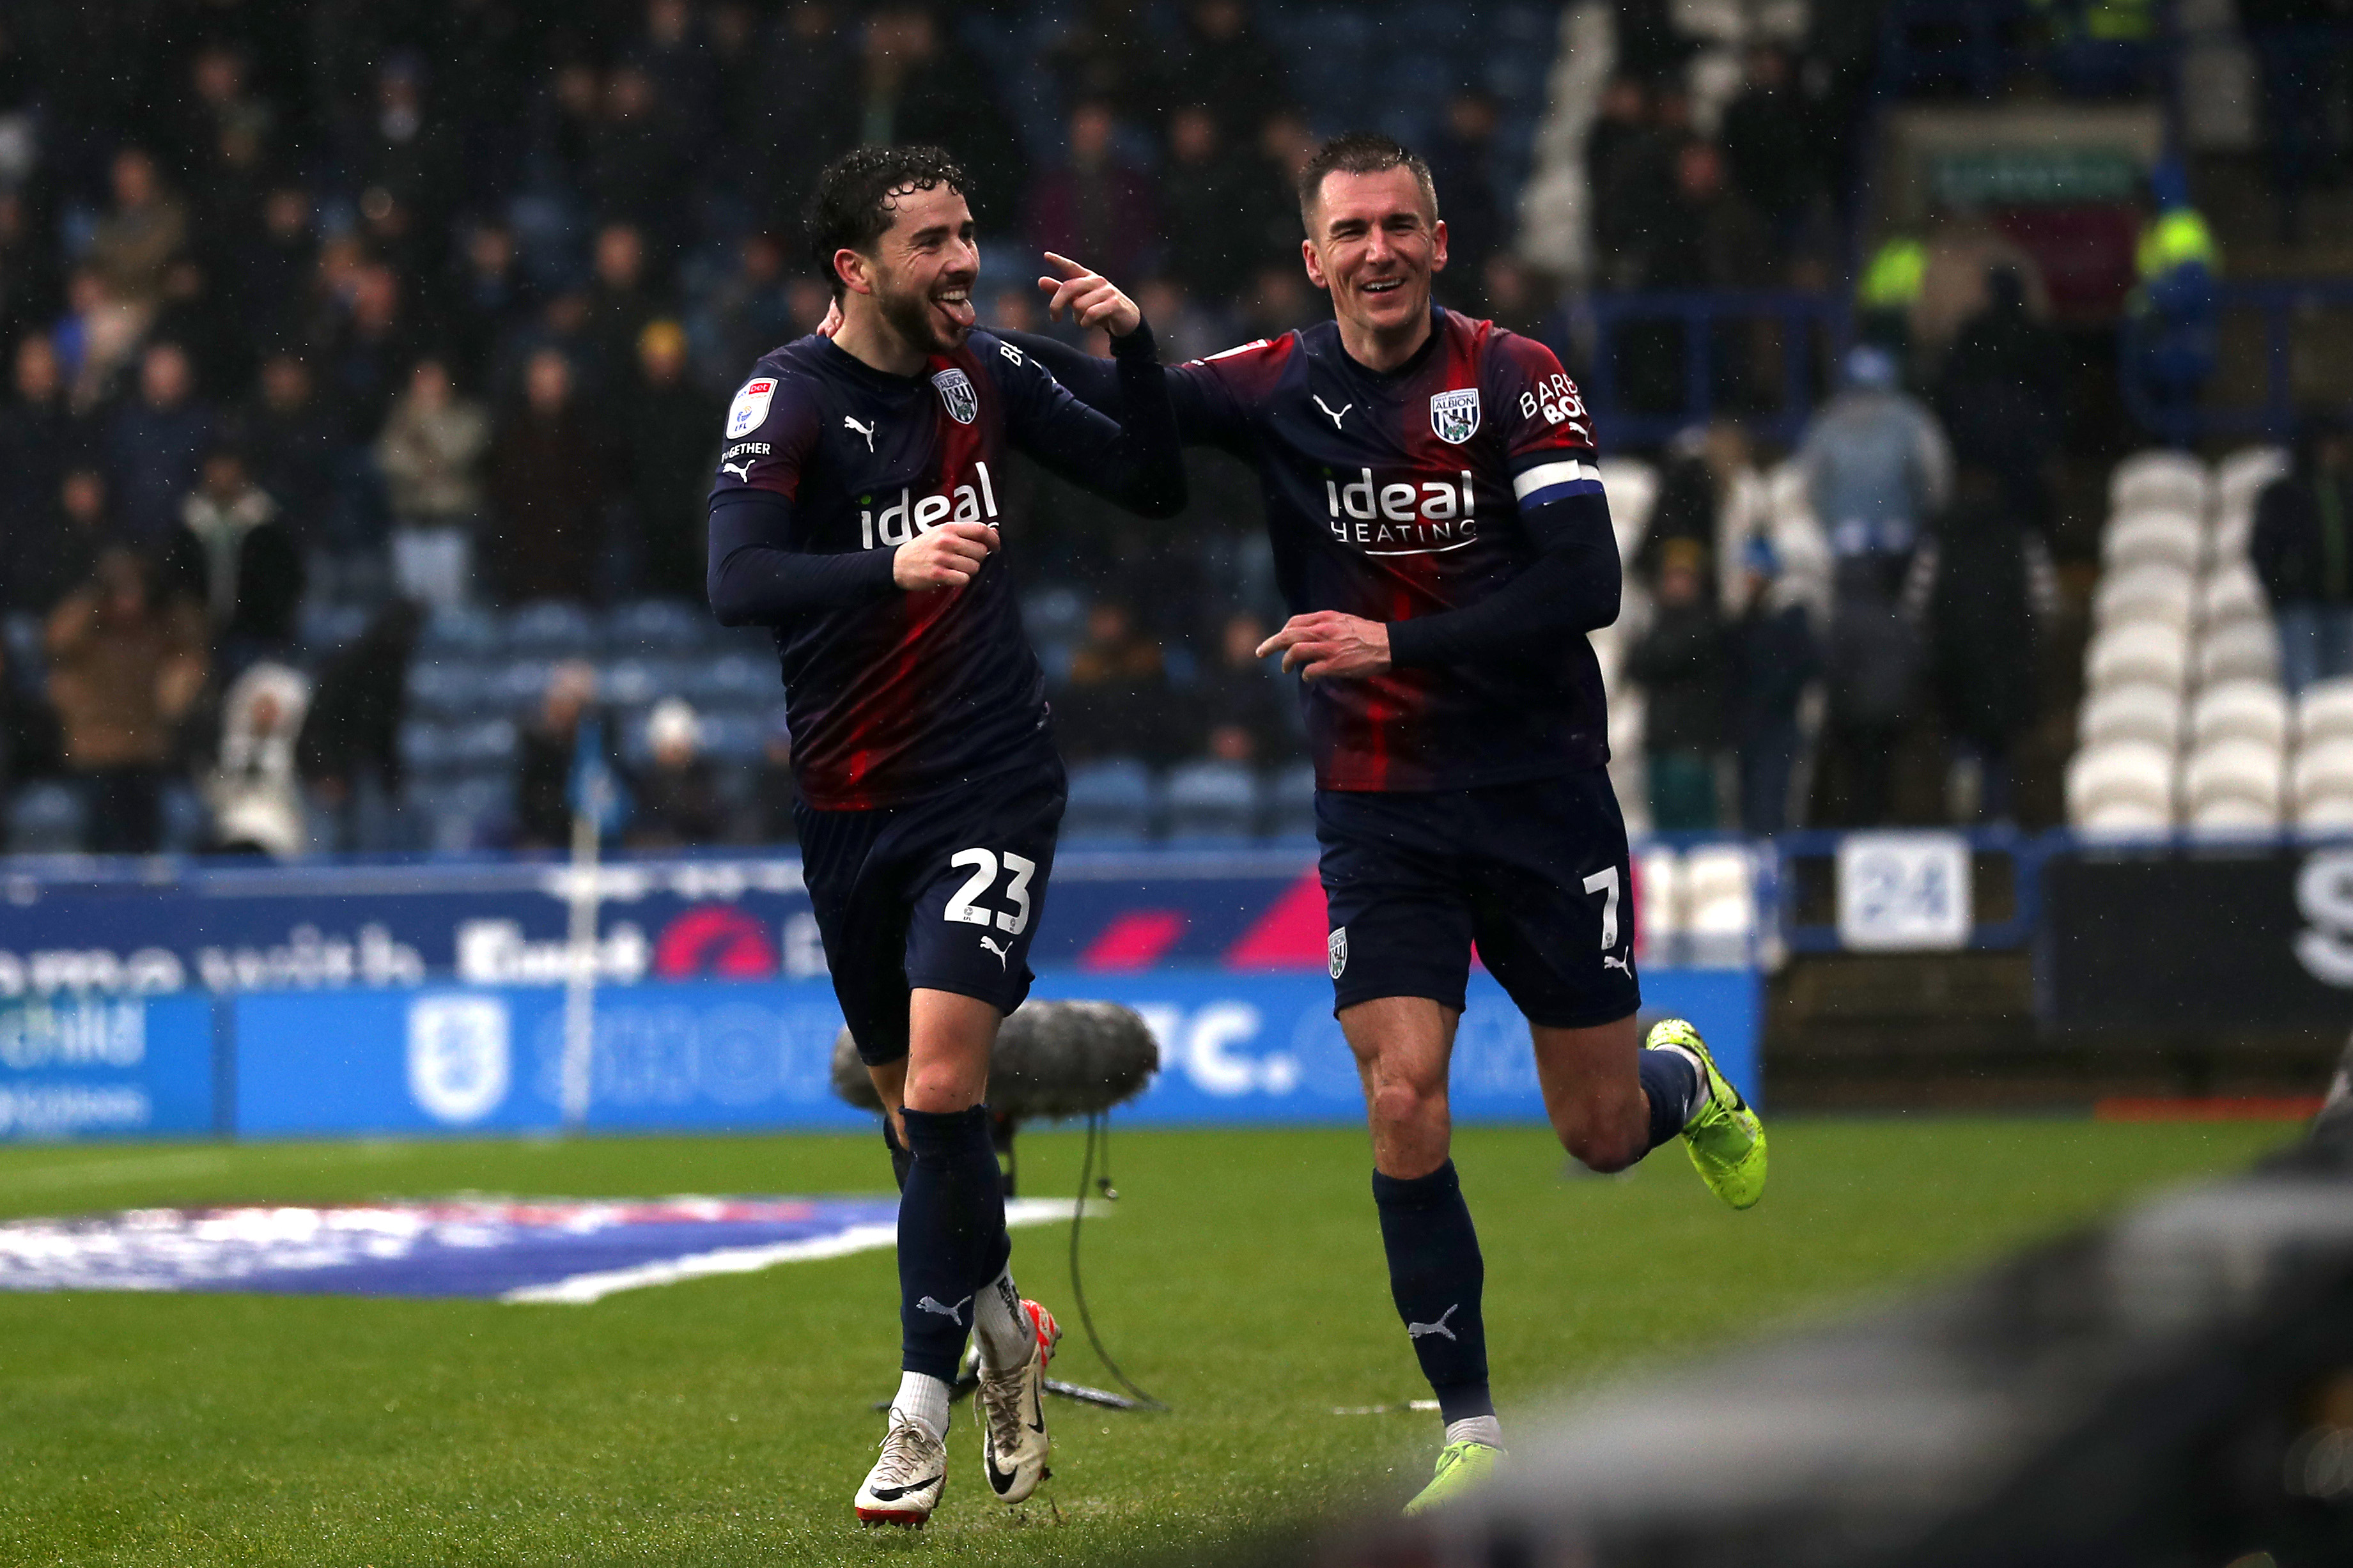 Mikey Johnston celebrates scoring against Huddersfield with Jed Wallace while wearing the navy-blue-and-red away kit